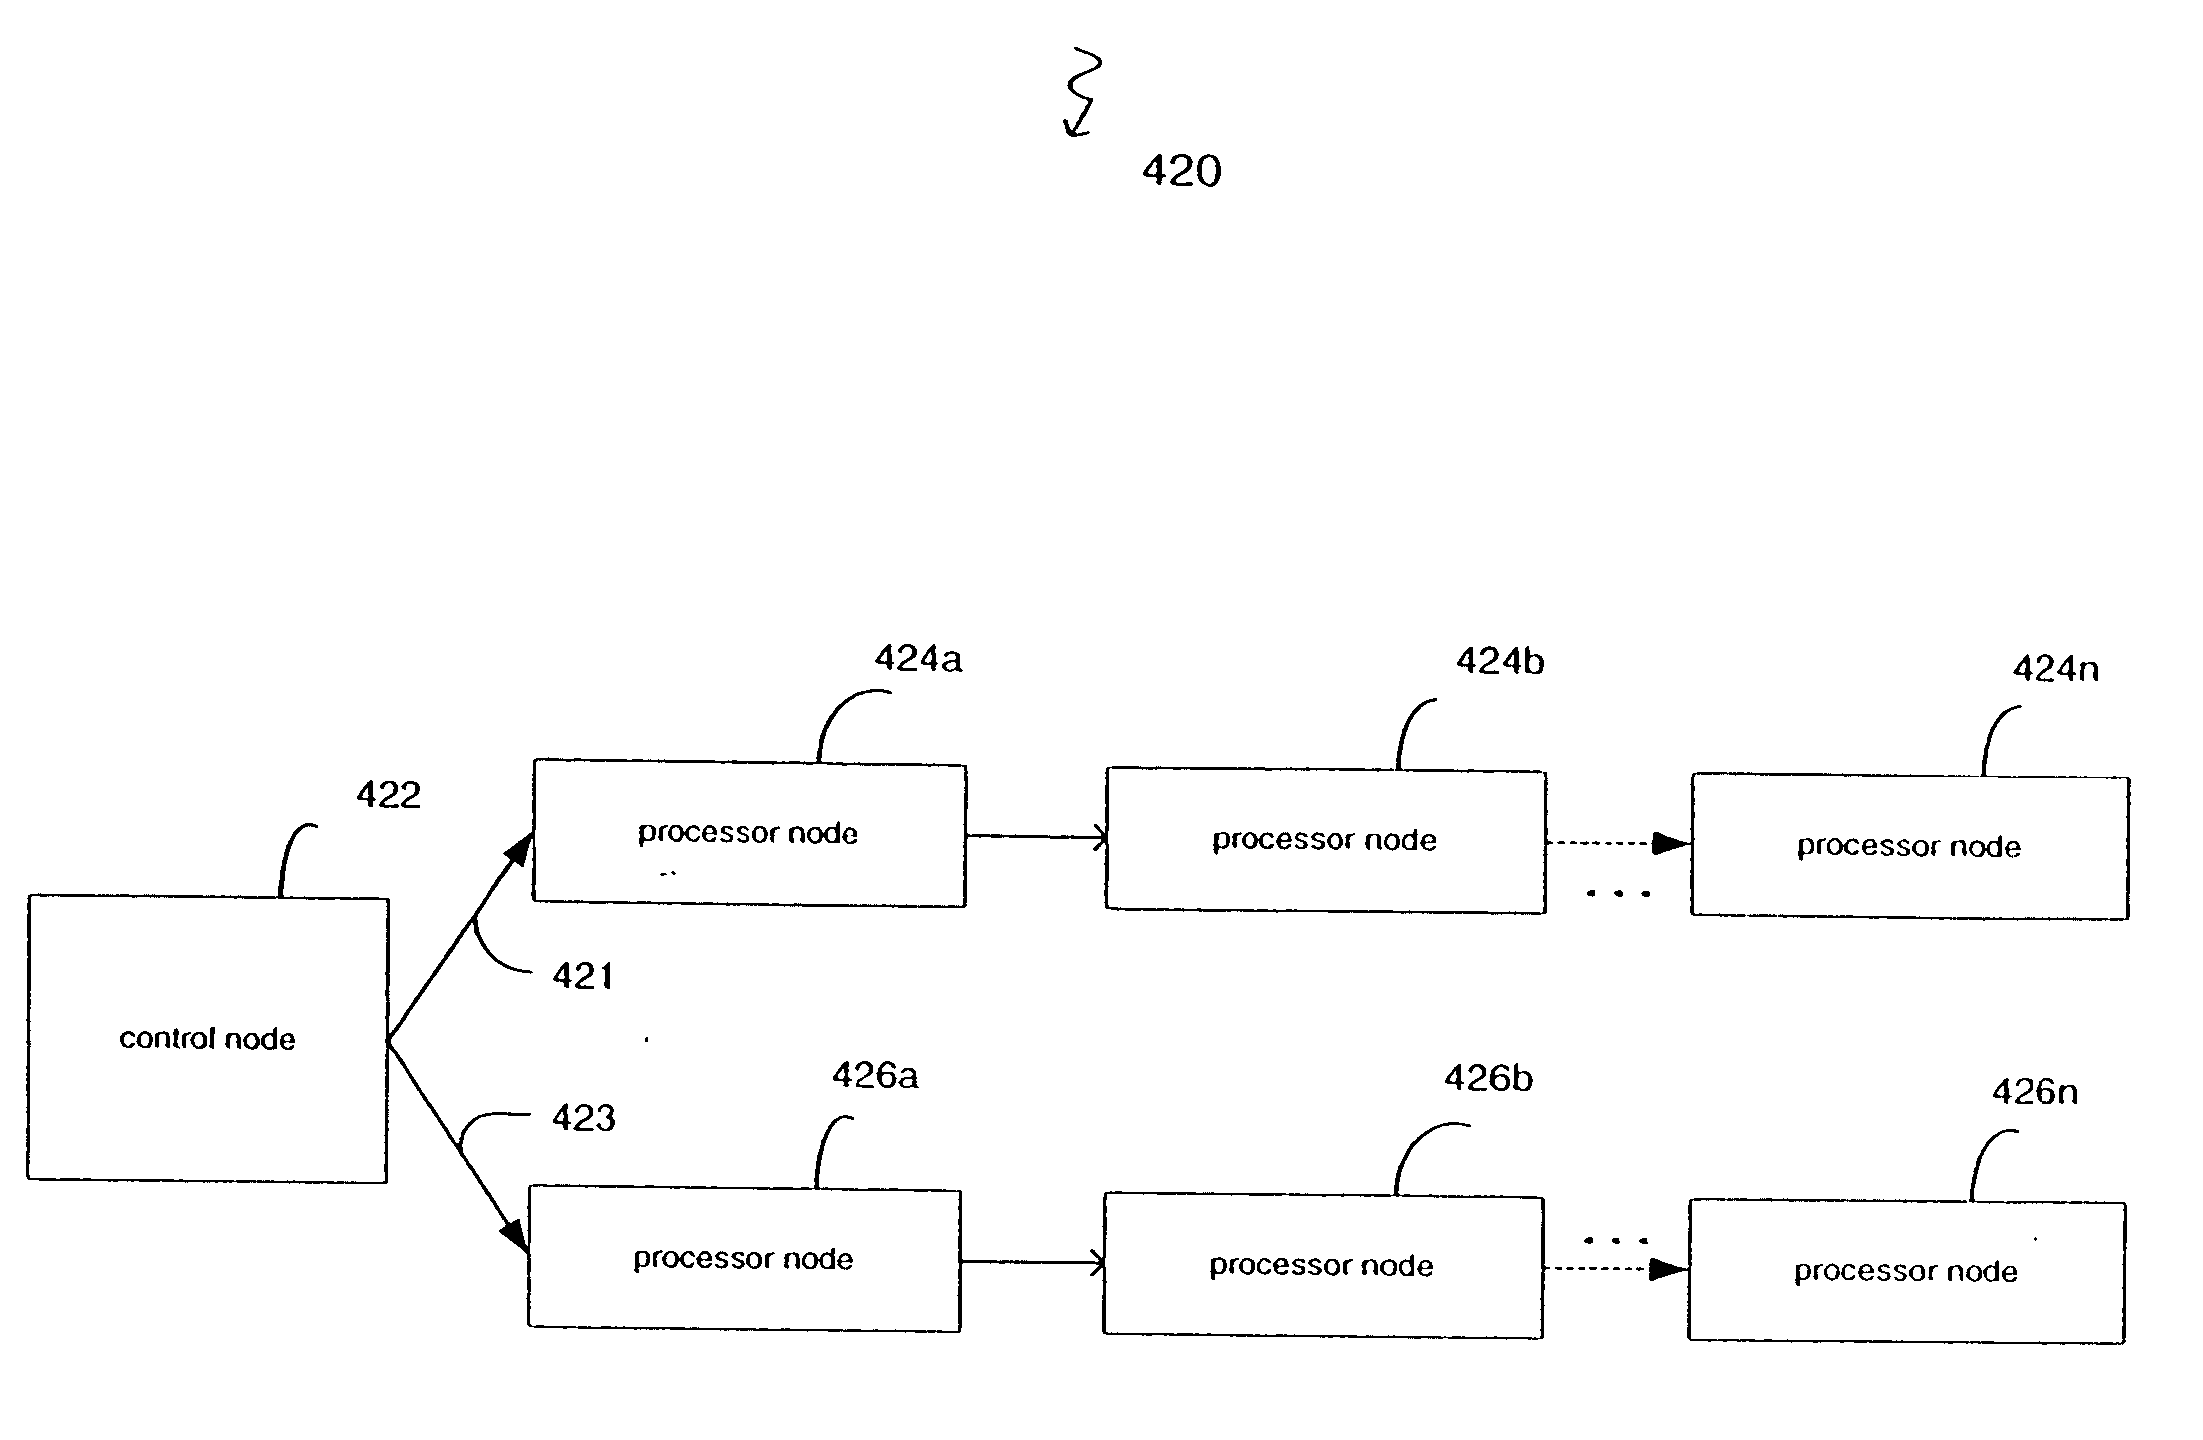 Distributed multicast system and method in a network